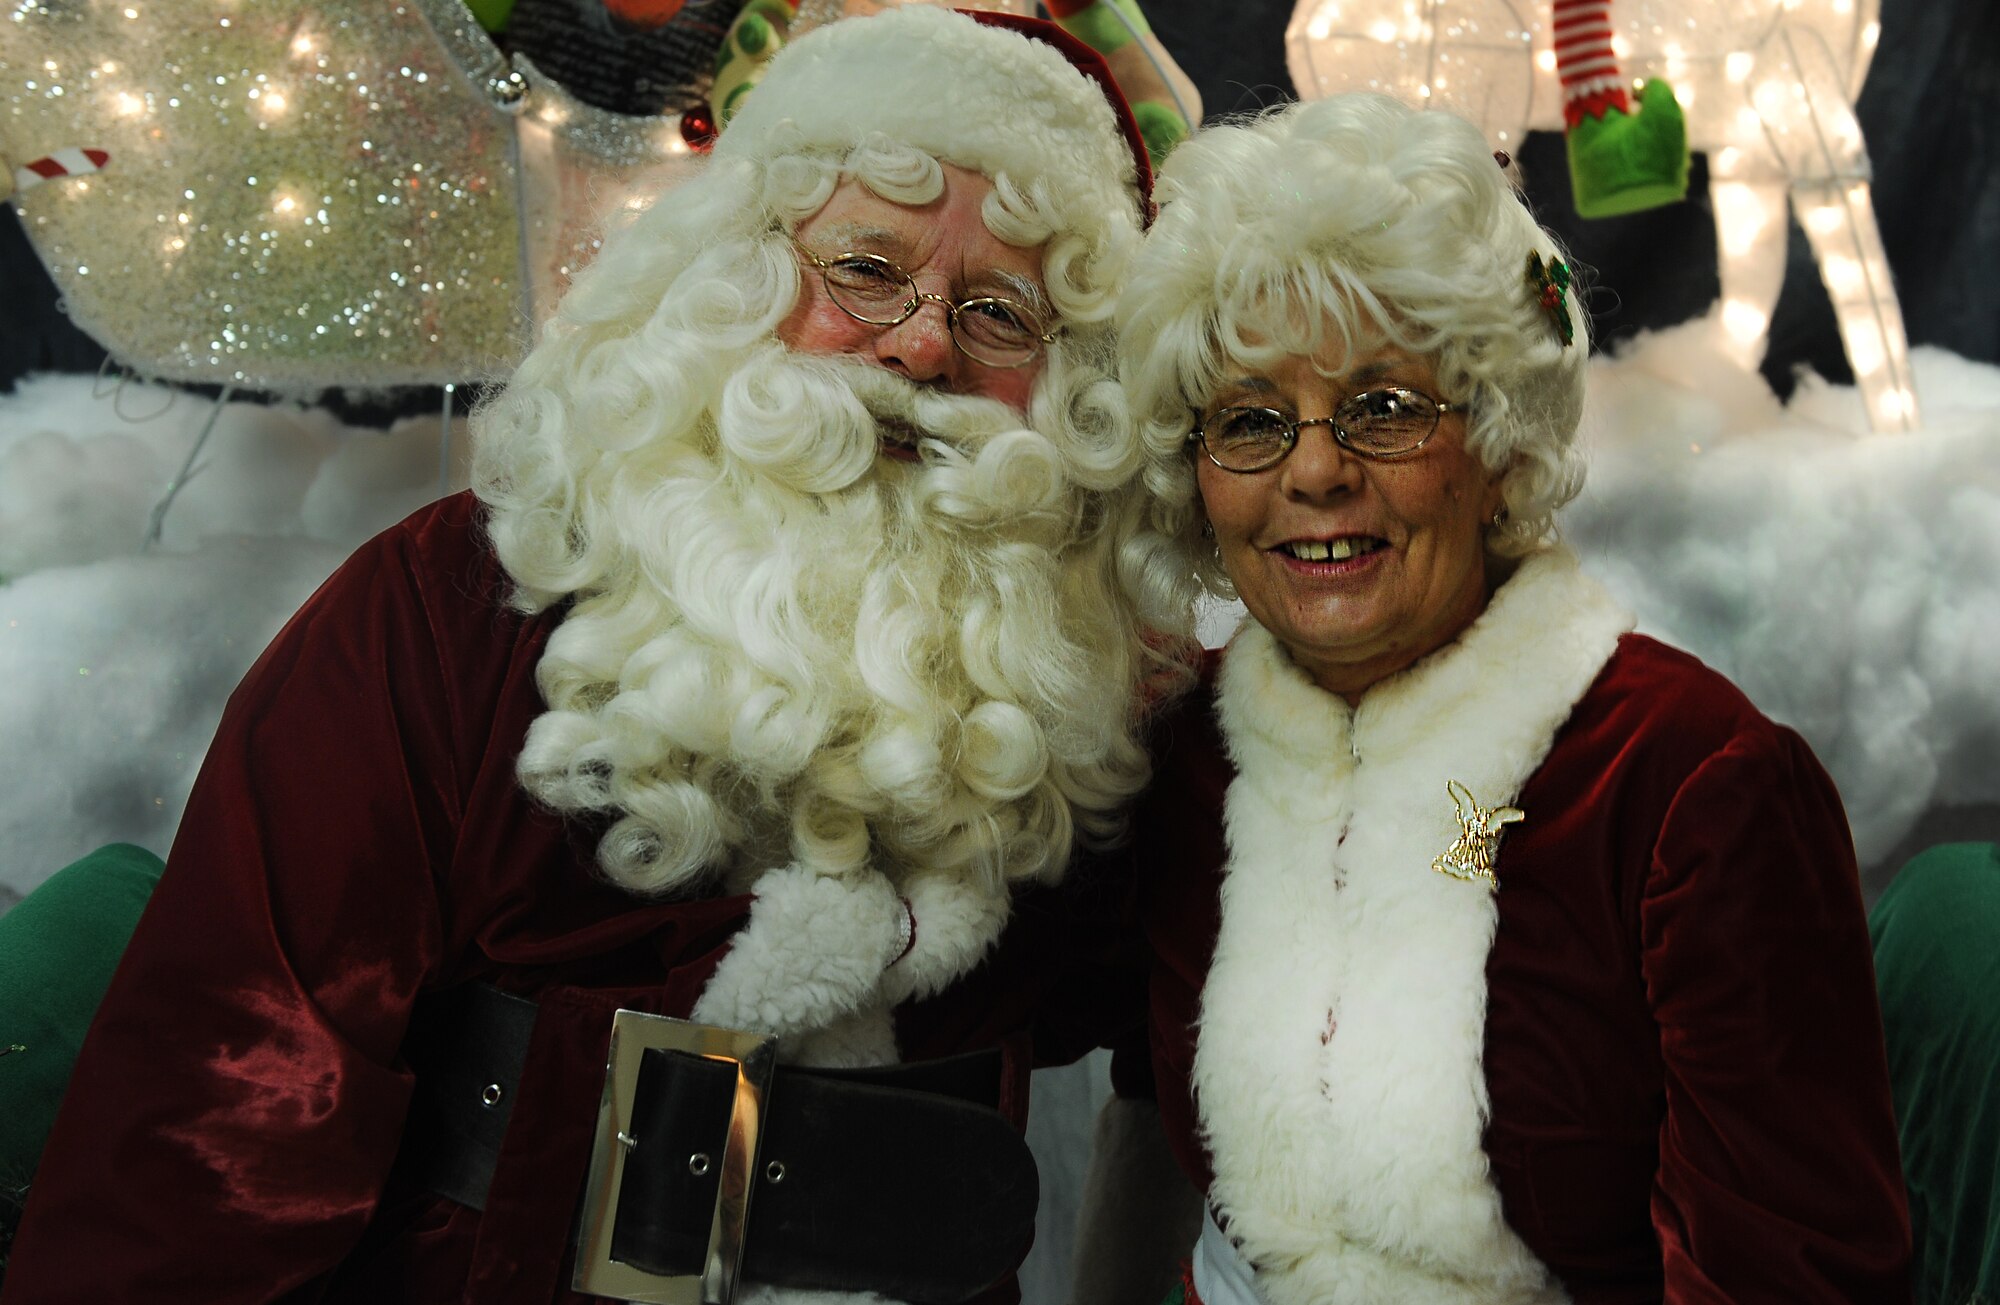 Santa and Mrs. Claus made an appearance in downtown Minot for the annual tree lighting Nov. 30, 2013. The two partook in Minot’s holiday celebration by taking photos and overseeing wish lists. (U.S. Air Force photo/Airman 1st Class Lauren Pitts)